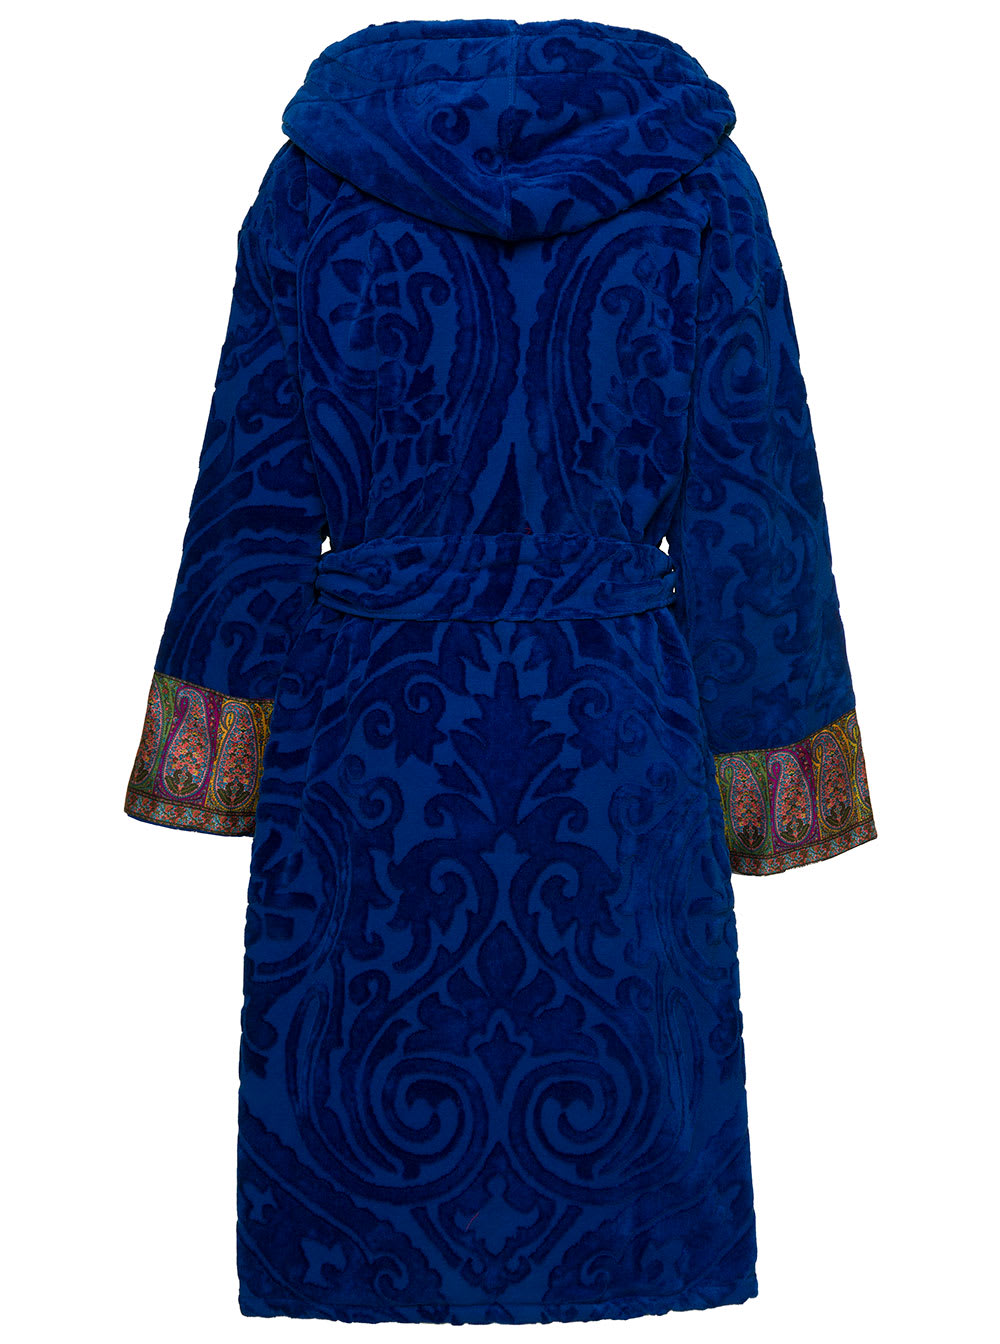 Etro New Tradition Blue Hooded Bath Dressing Gown With Ornamental Print  Home